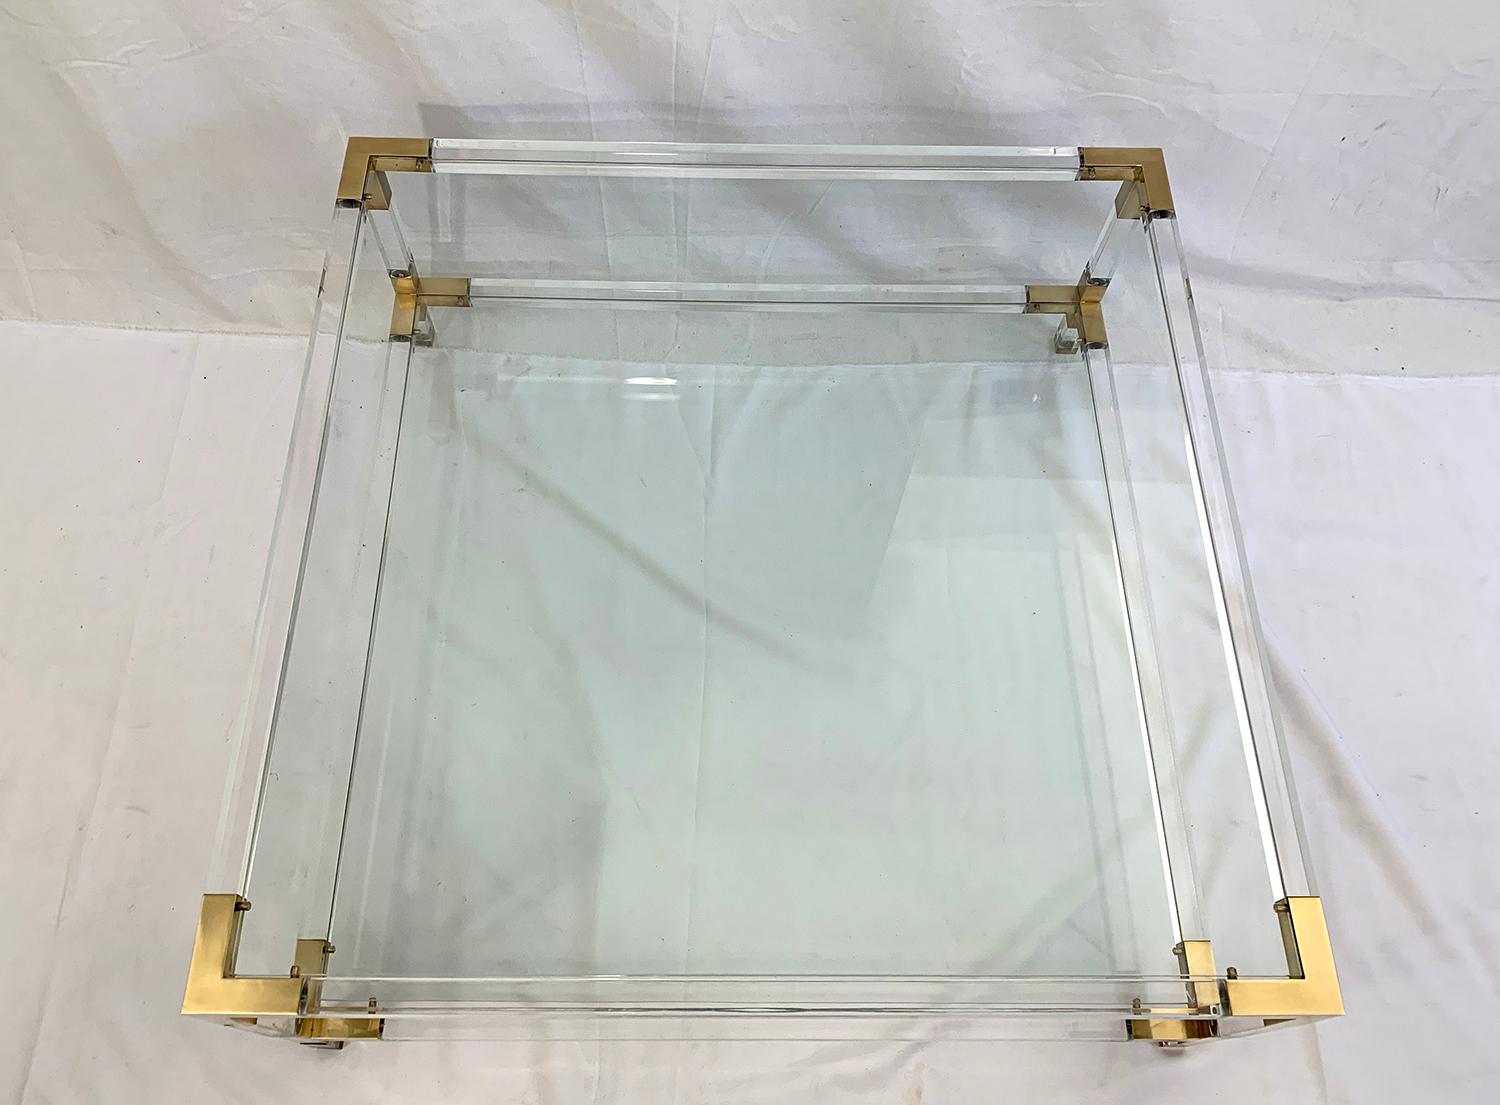 Large coffee table with two glass shelves in the style of Charles Hollis or Maison Jansen, The windows are removable and the frame is made of Lucite with corners in polished brass. Manufacture, circa 1970.

The glass can be replaced for 200